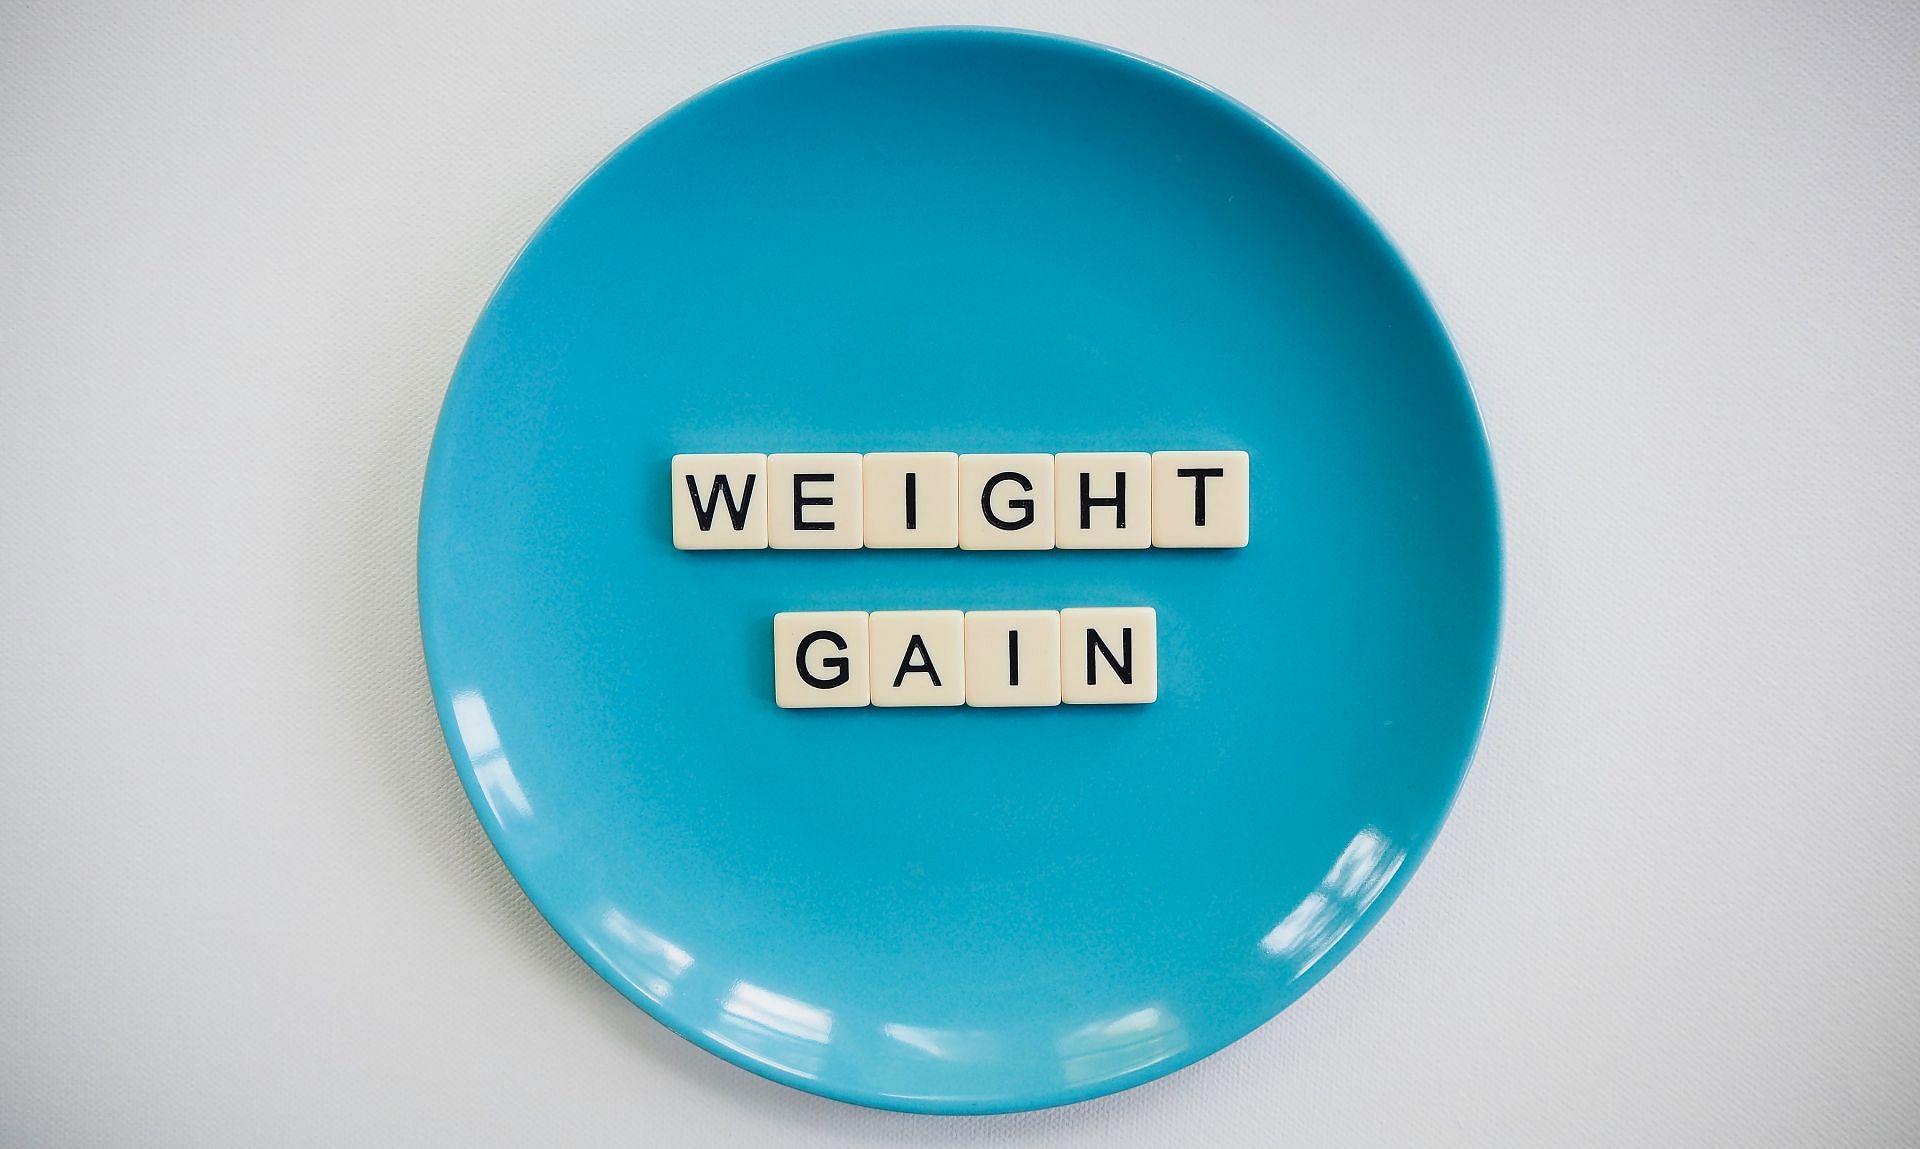 Healthy weight gain can improve your overall well-being (Image via Unsplash / Total Shape)